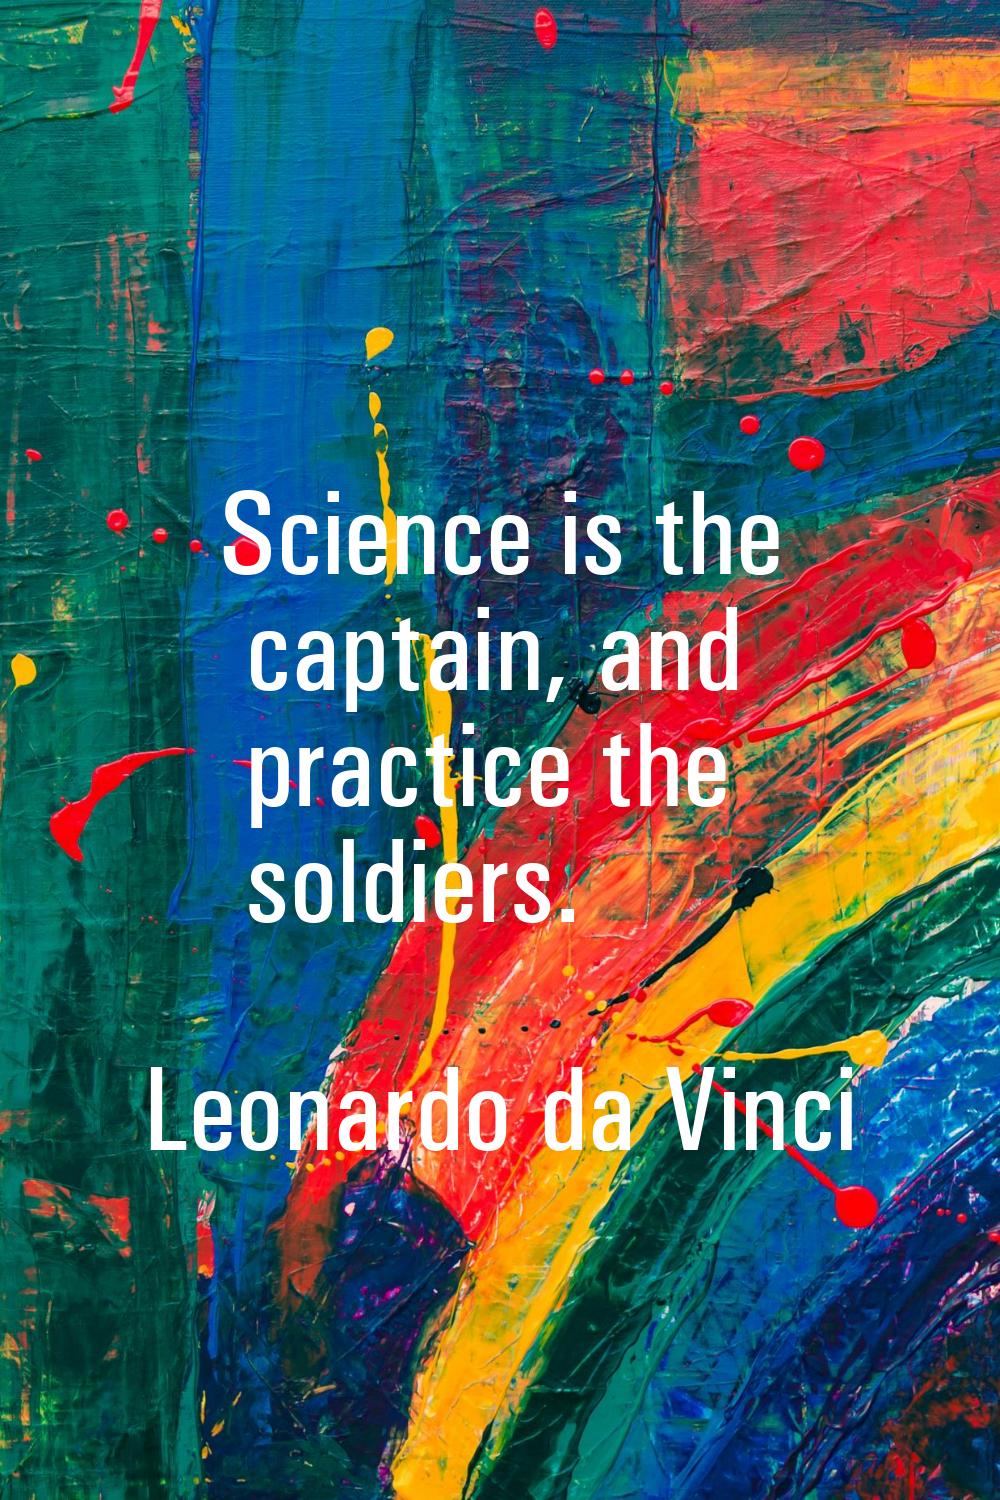 Science is the captain, and practice the soldiers.